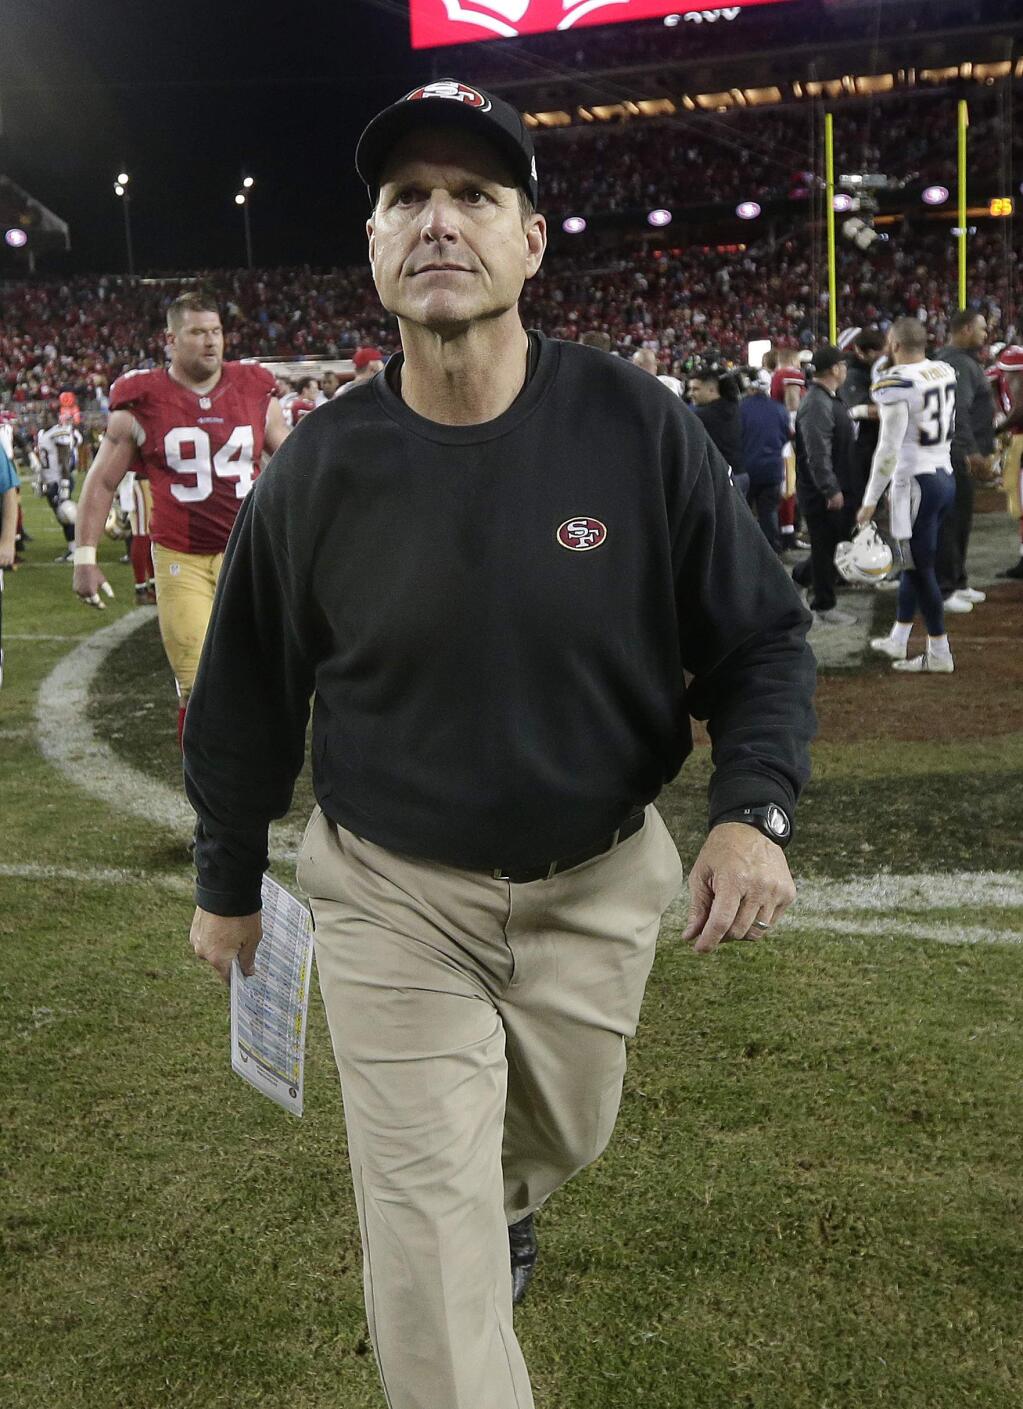 San Francisco 49ers coach Jim Harbaugh walks off the field after the 49ers lost 38-35 in overtime to the San Diego Chargers in an NFL football game in Santa Clara, Calif., Saturday, Dec. 20, 2014. (AP Photo/Marcio Jose Sanchez)